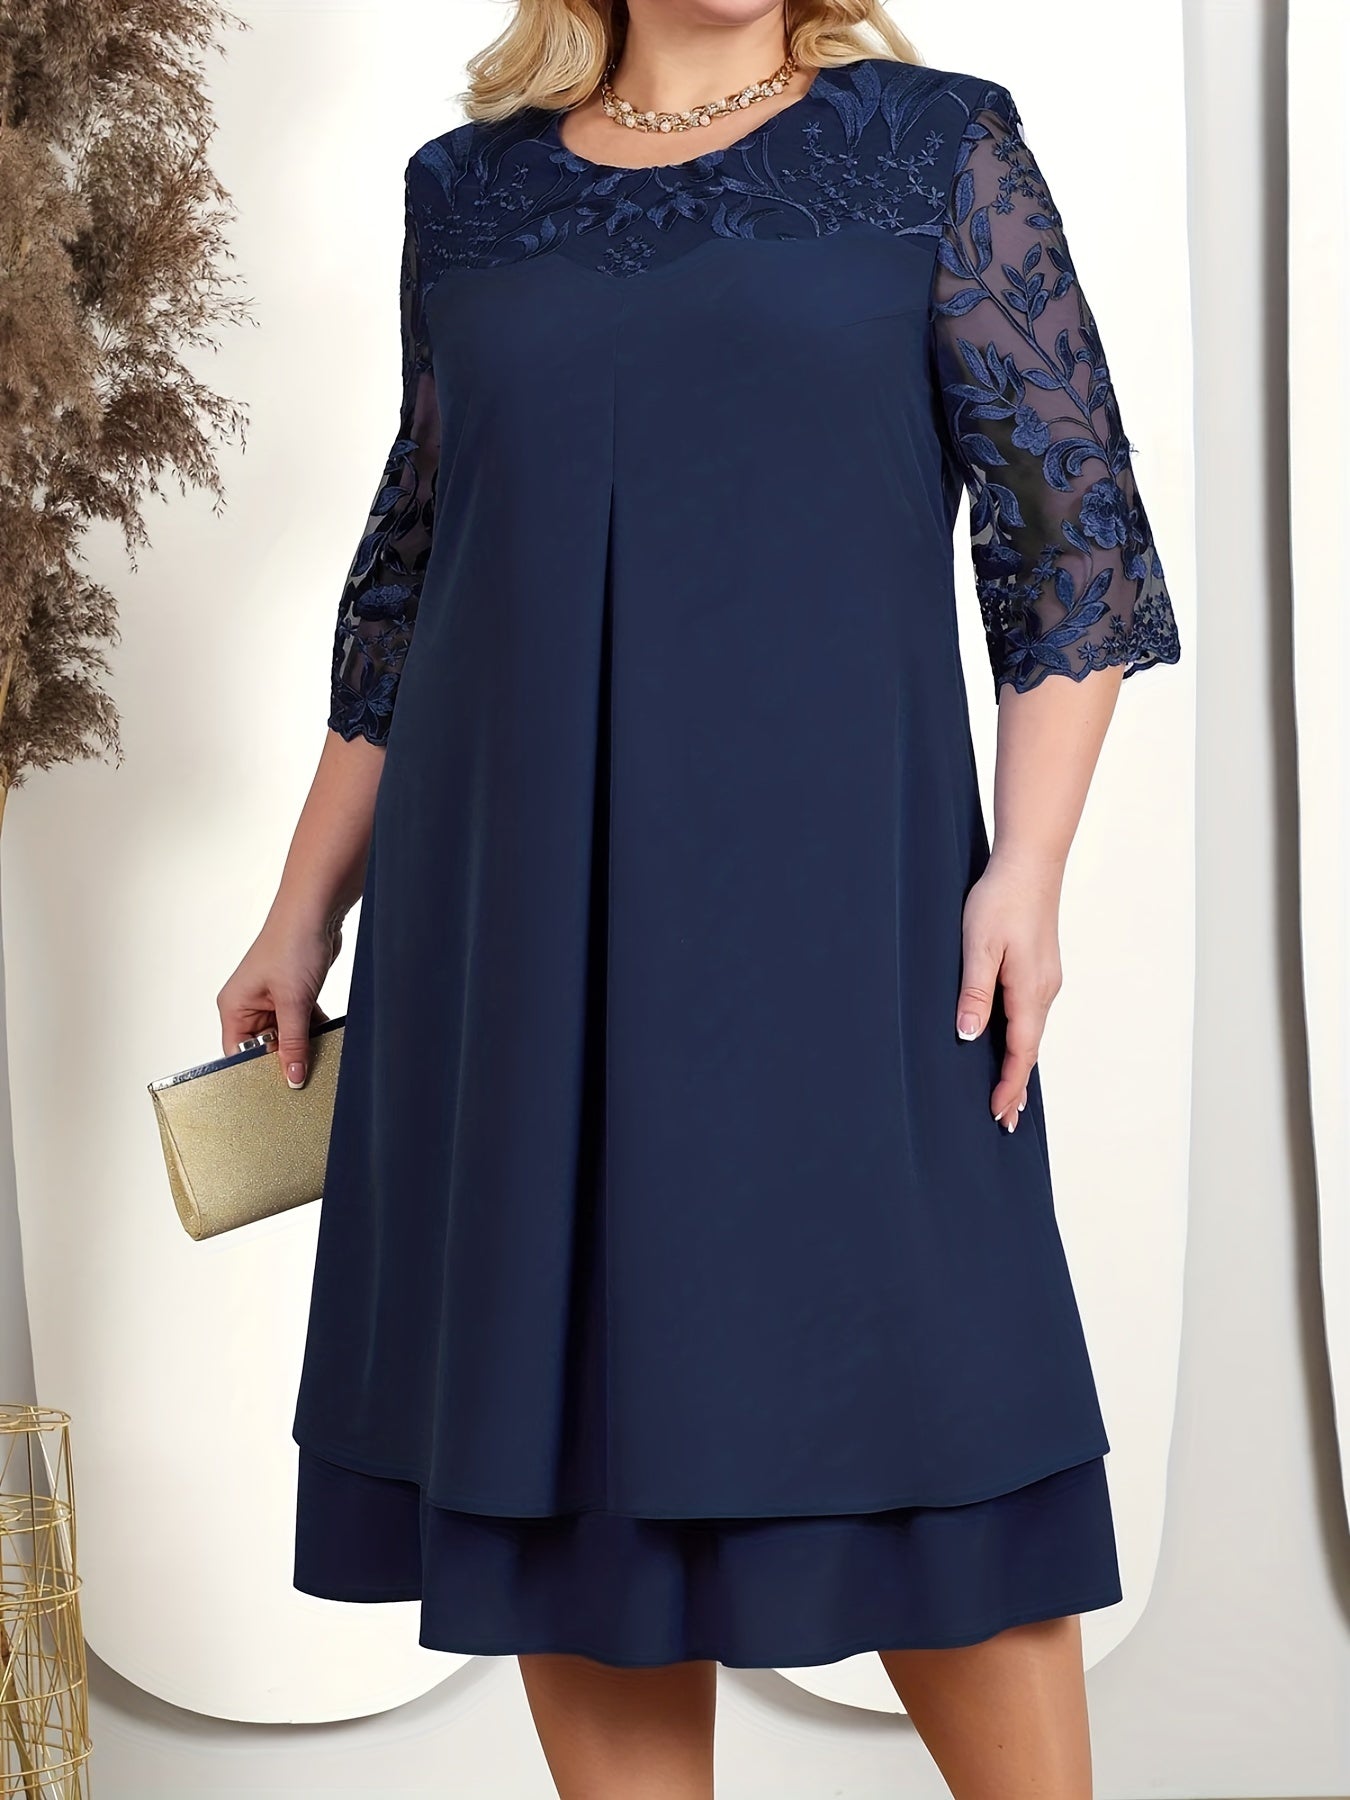 Antmvs Plus Size Casual Dress, Women's Plus Solid Contrast Lace Jacquard Half Sleeve Round Neck Layered Dress